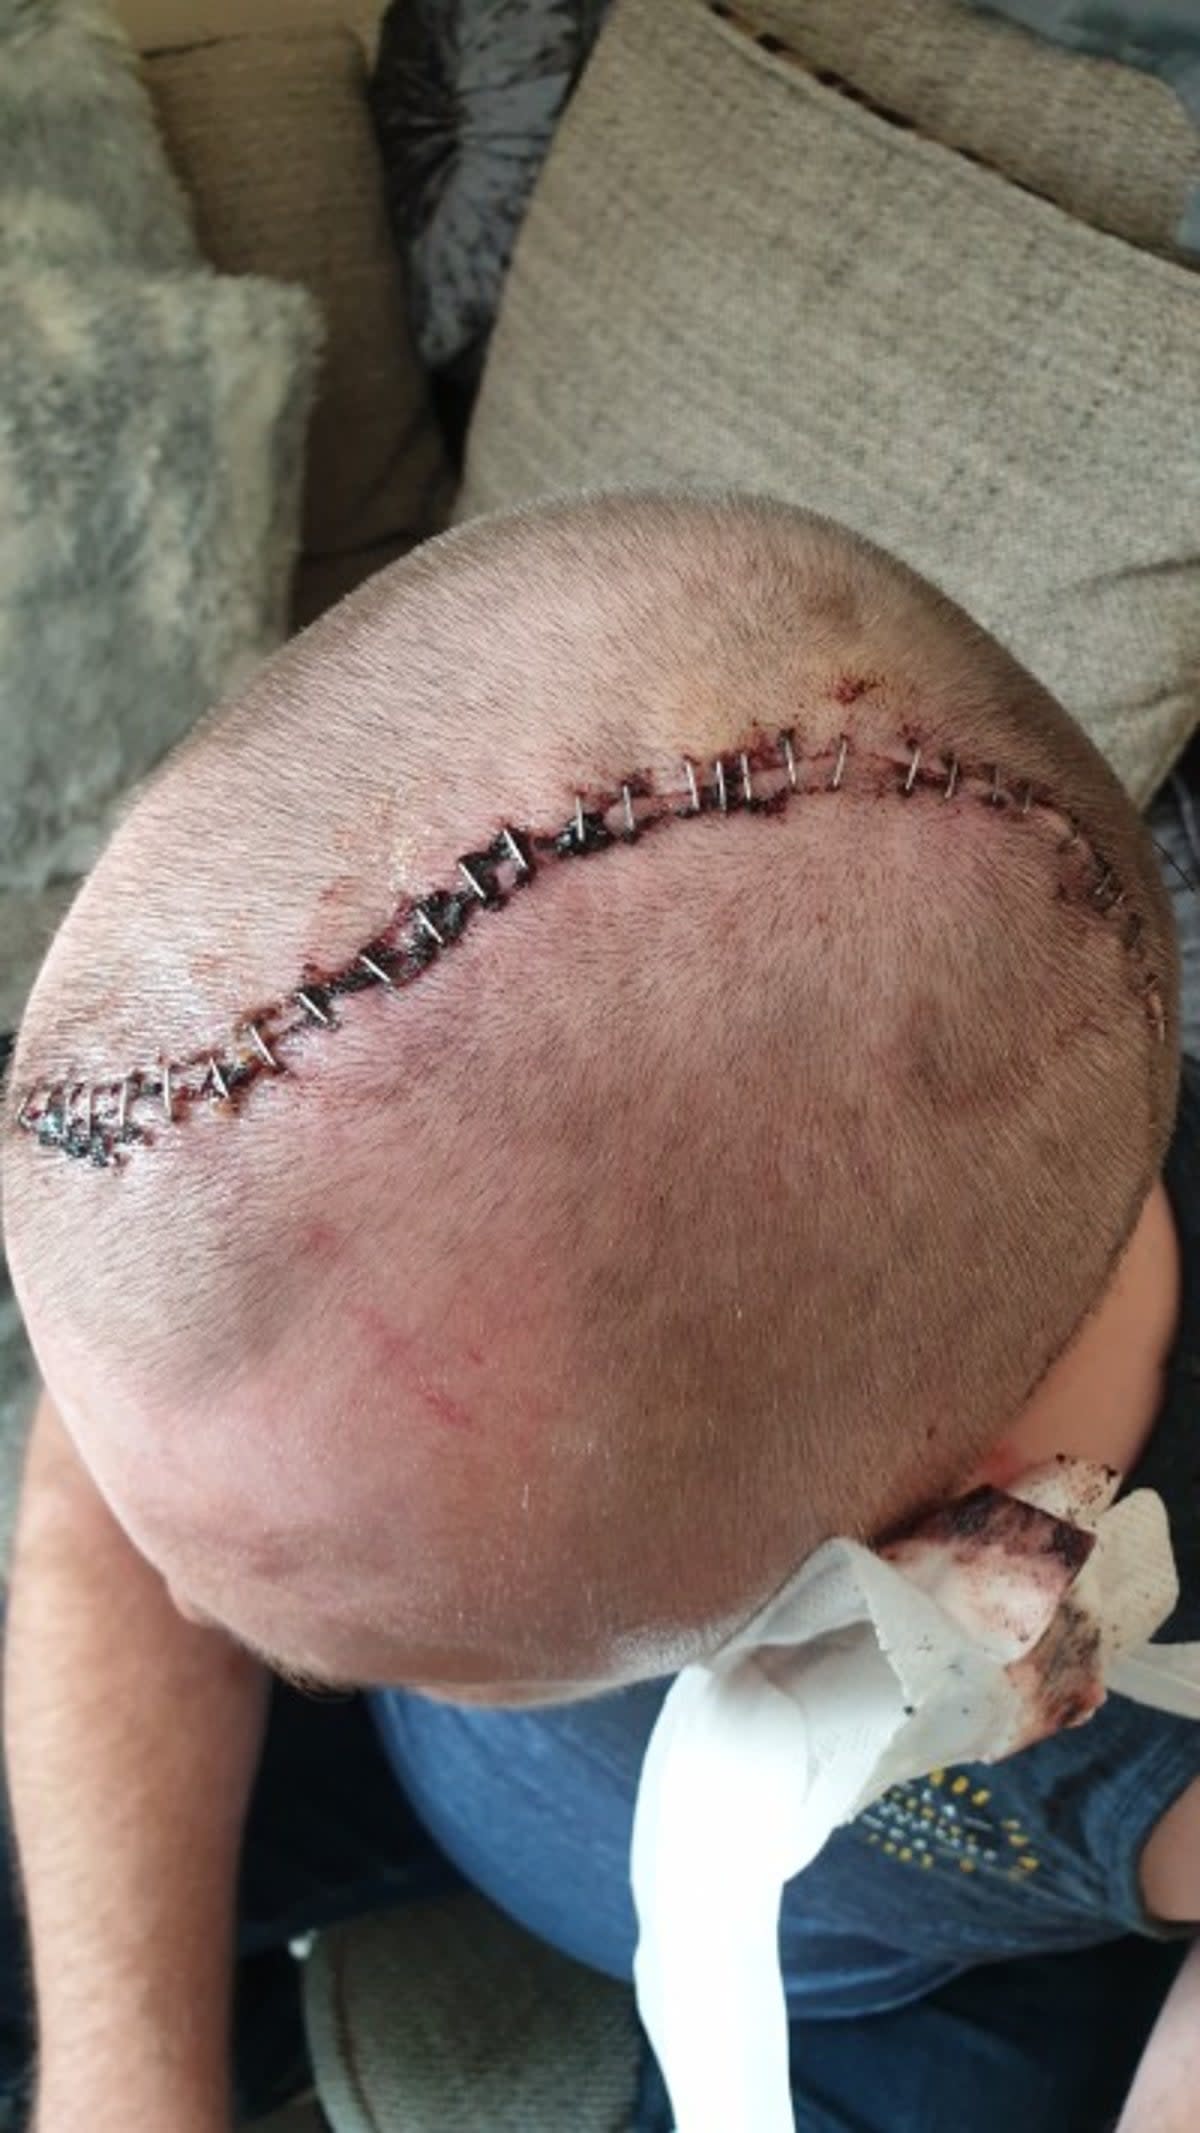 He has recently had surgery to put a titanium plate in his head to replace where his skull should have been (North Yorkshire Police)